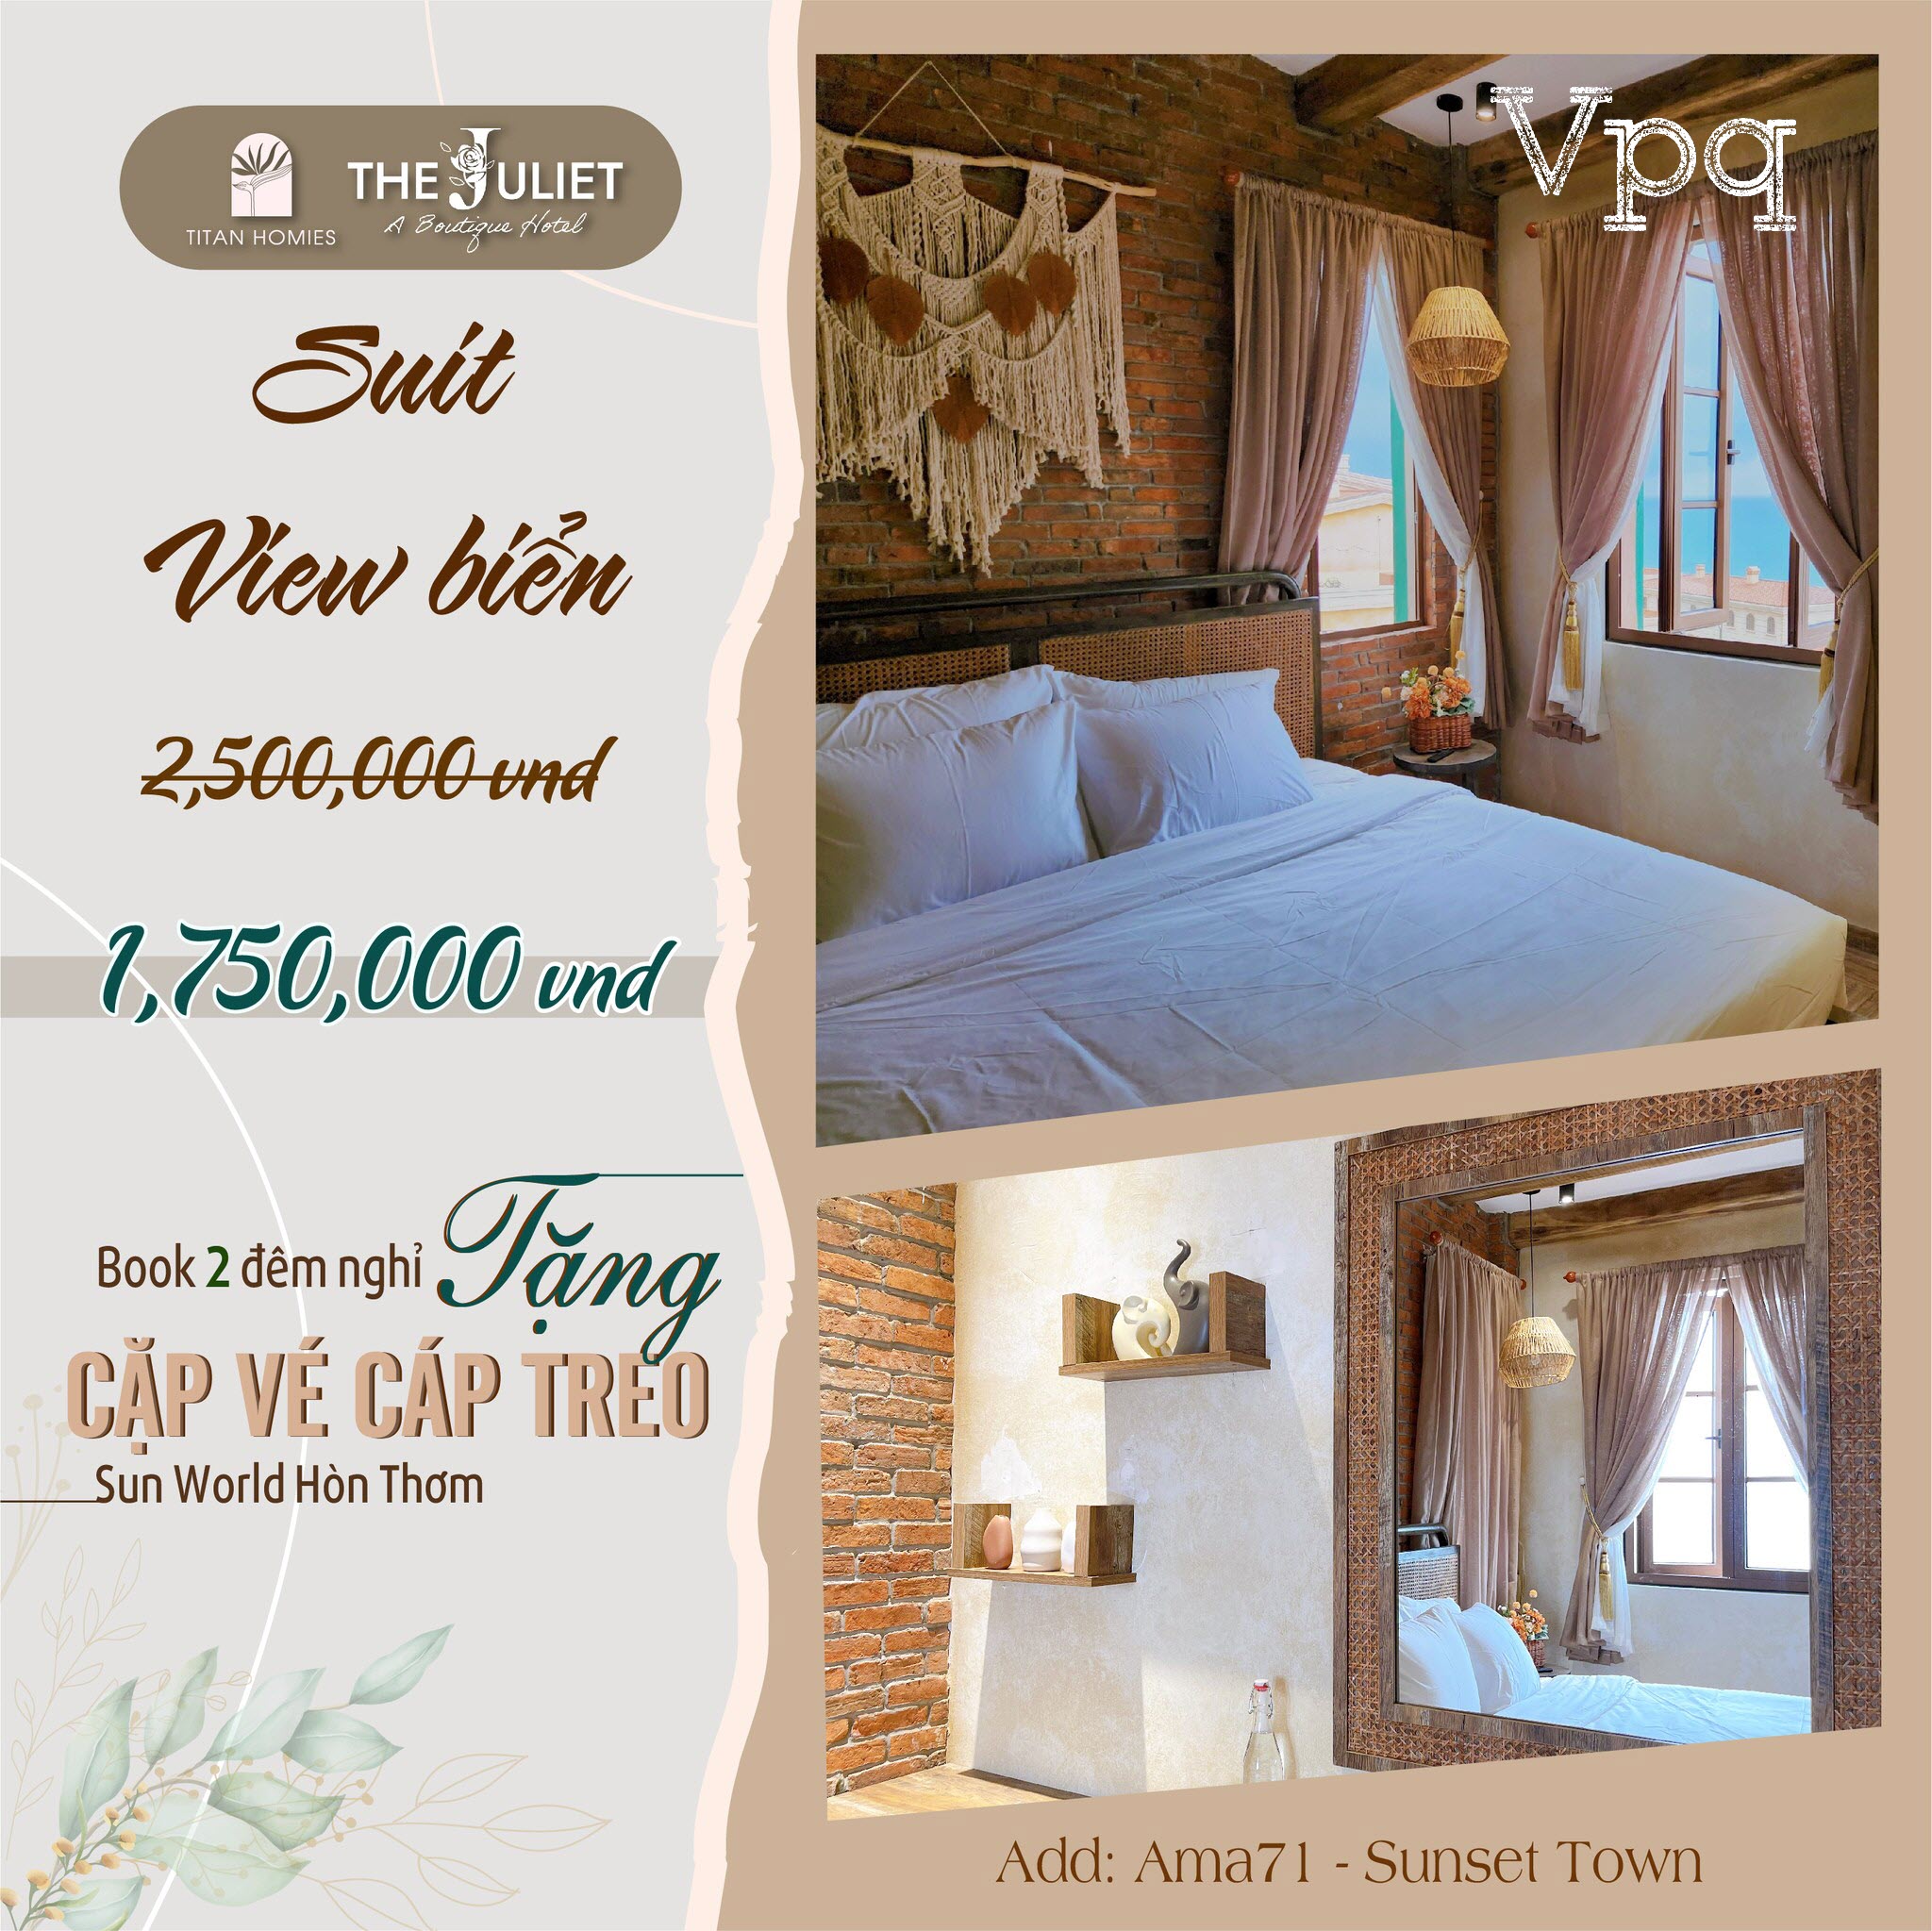 Suite View Biển